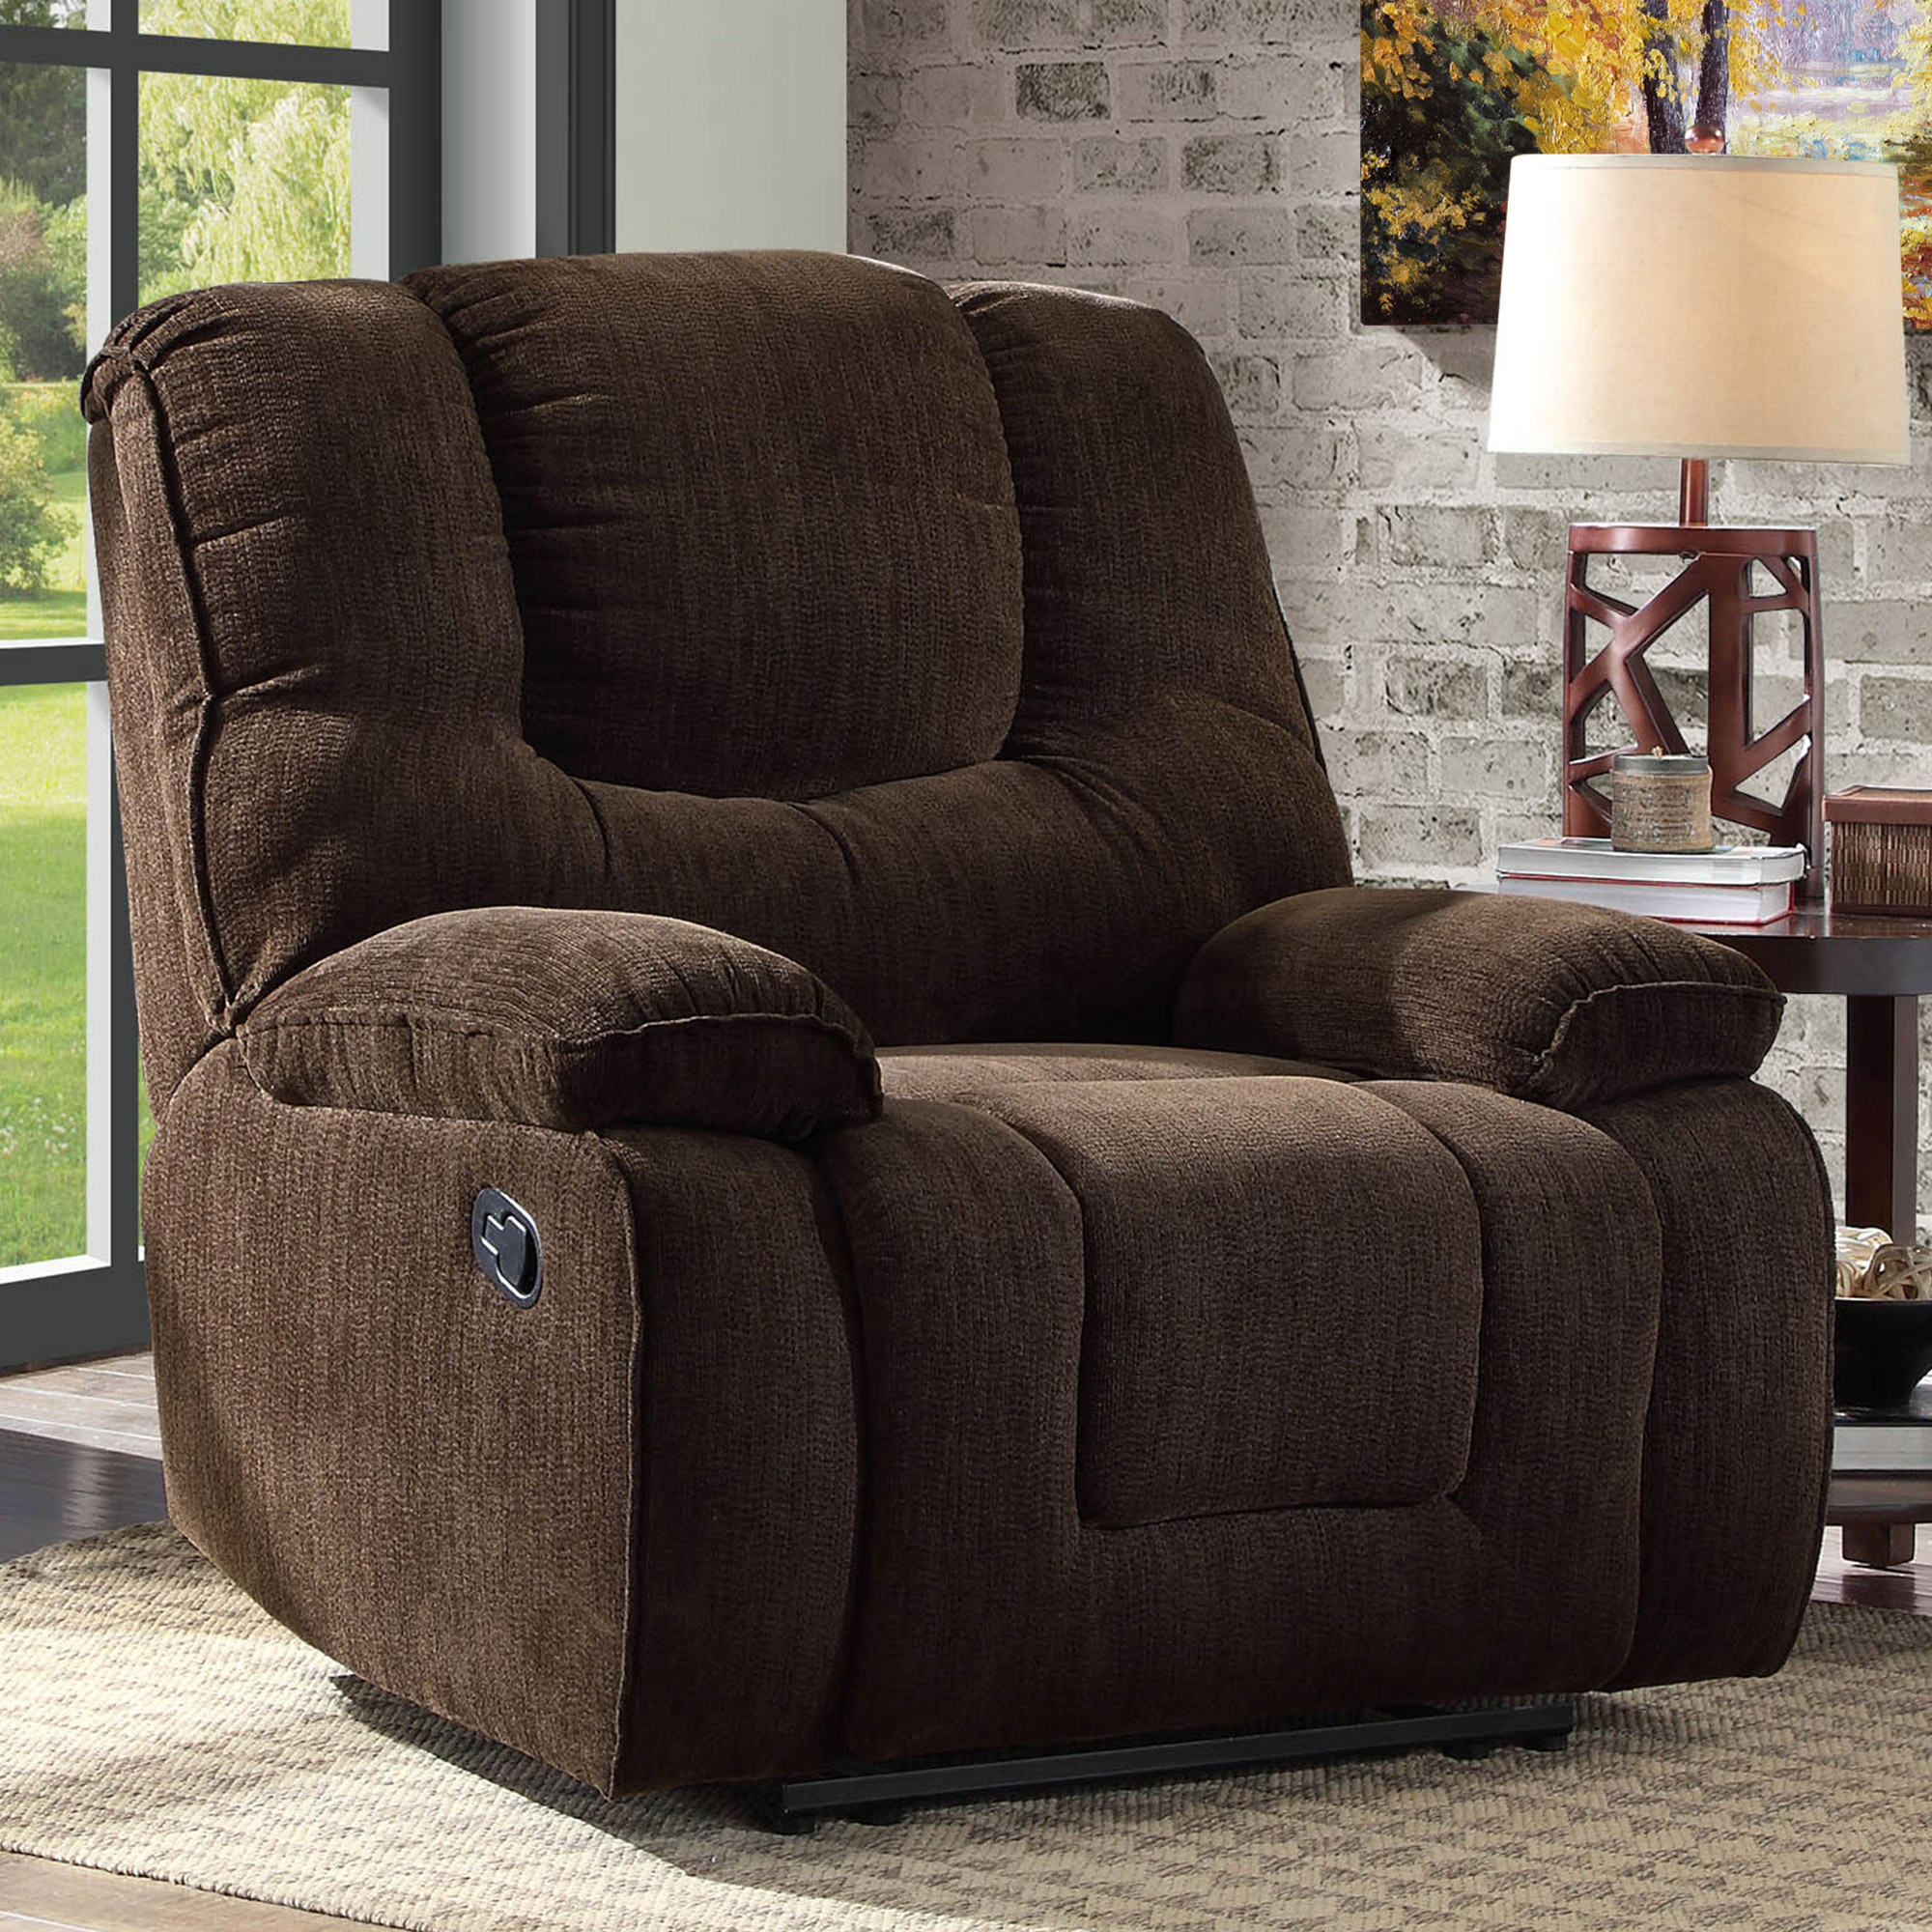 Product Image Better Homes and Gardens Big & Tall Recliner with In-Arm  Storage and USB,